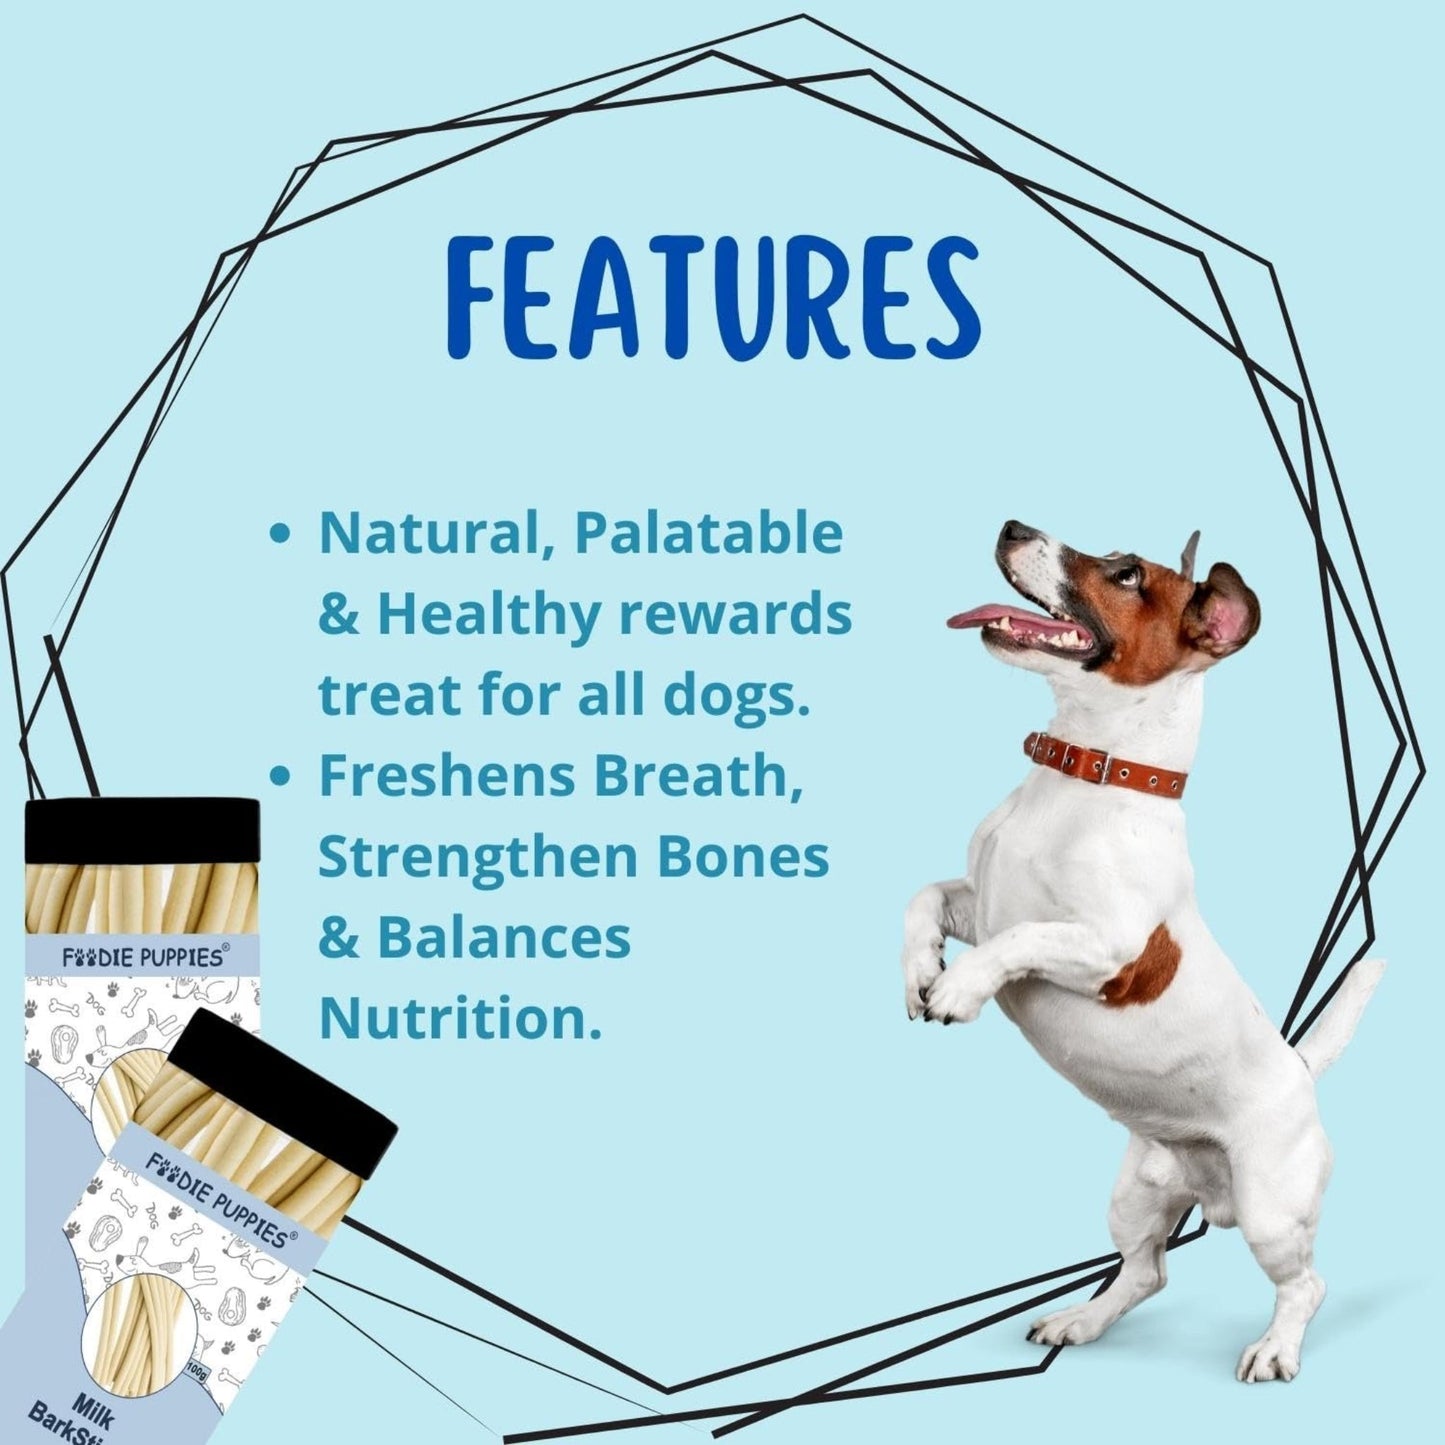 Foodie Puppies Barksticks Milk Sticks Treat for Dogs - 100g, Pack of 5